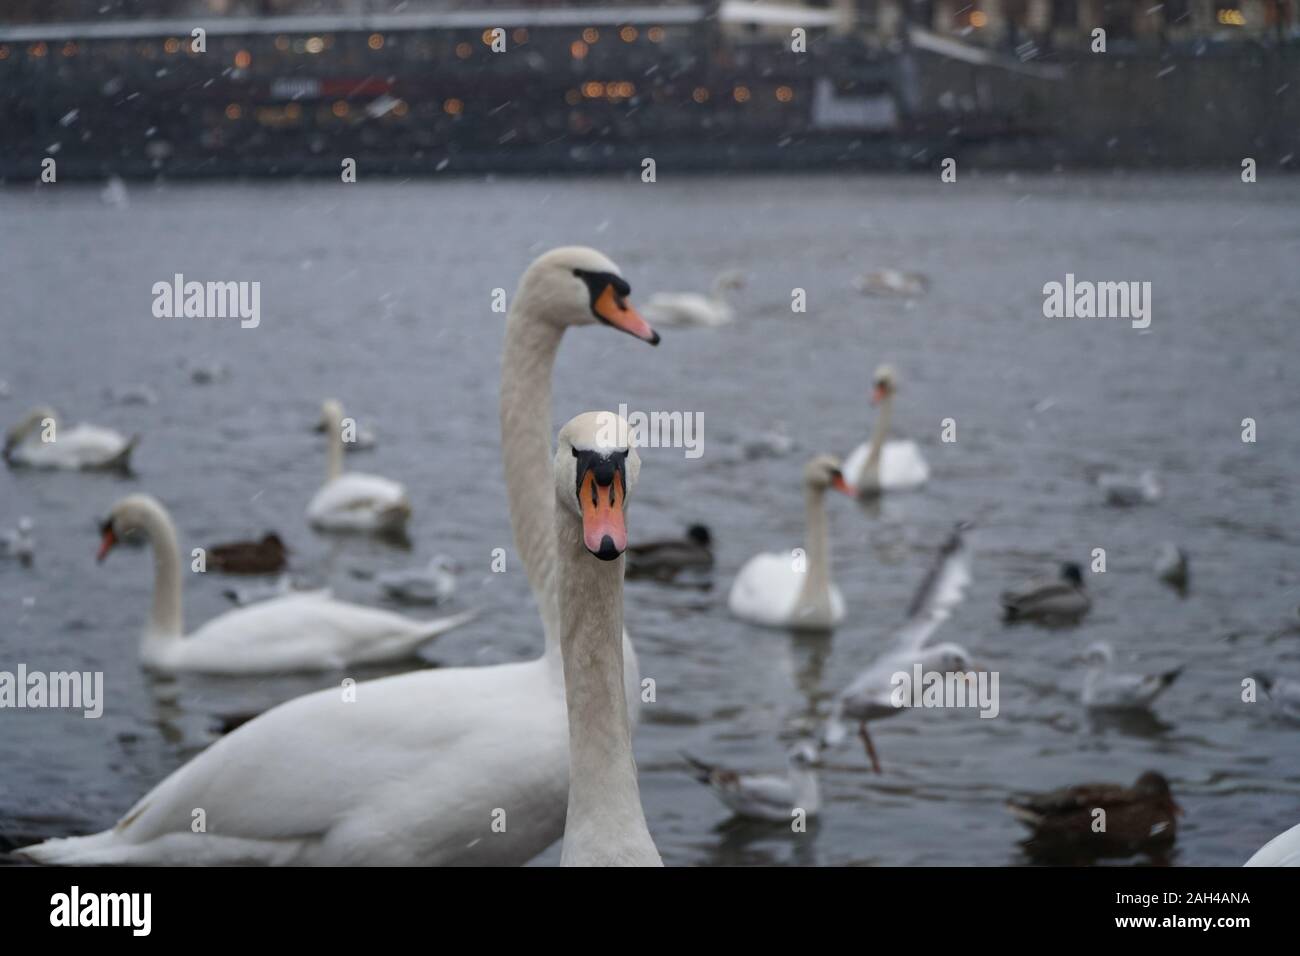 Prague, Czech Republic 2019: Swans on the banks of the Moldava river in Prague during a snowfall Stock Photo